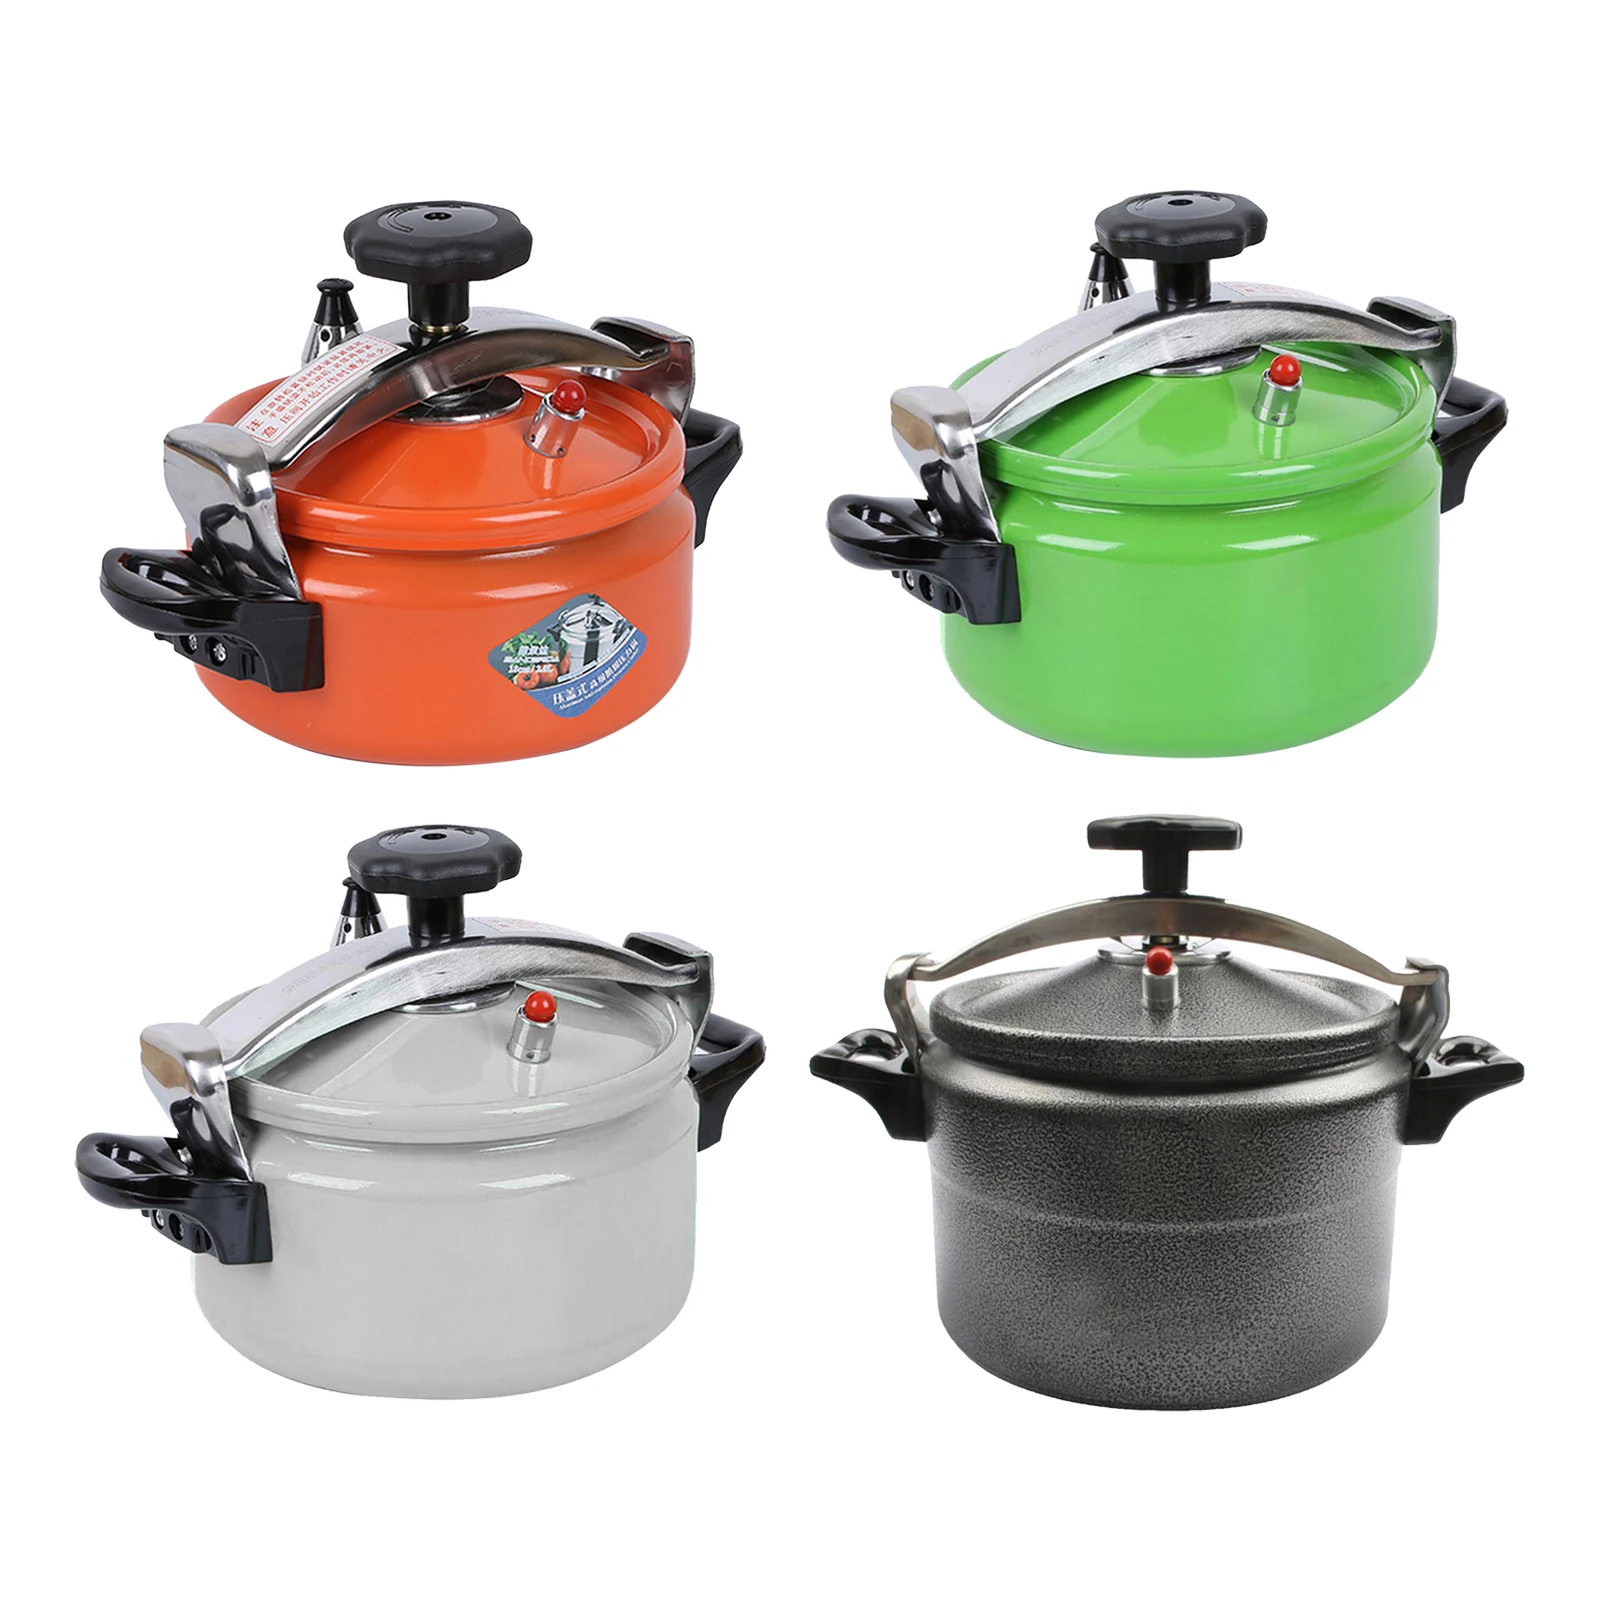 

Multi-Functional Pressure Cooker Soup Rice Cooking Slow Cooker Outdoor Camping Backpacking Pot for Electric Ceramic Stove